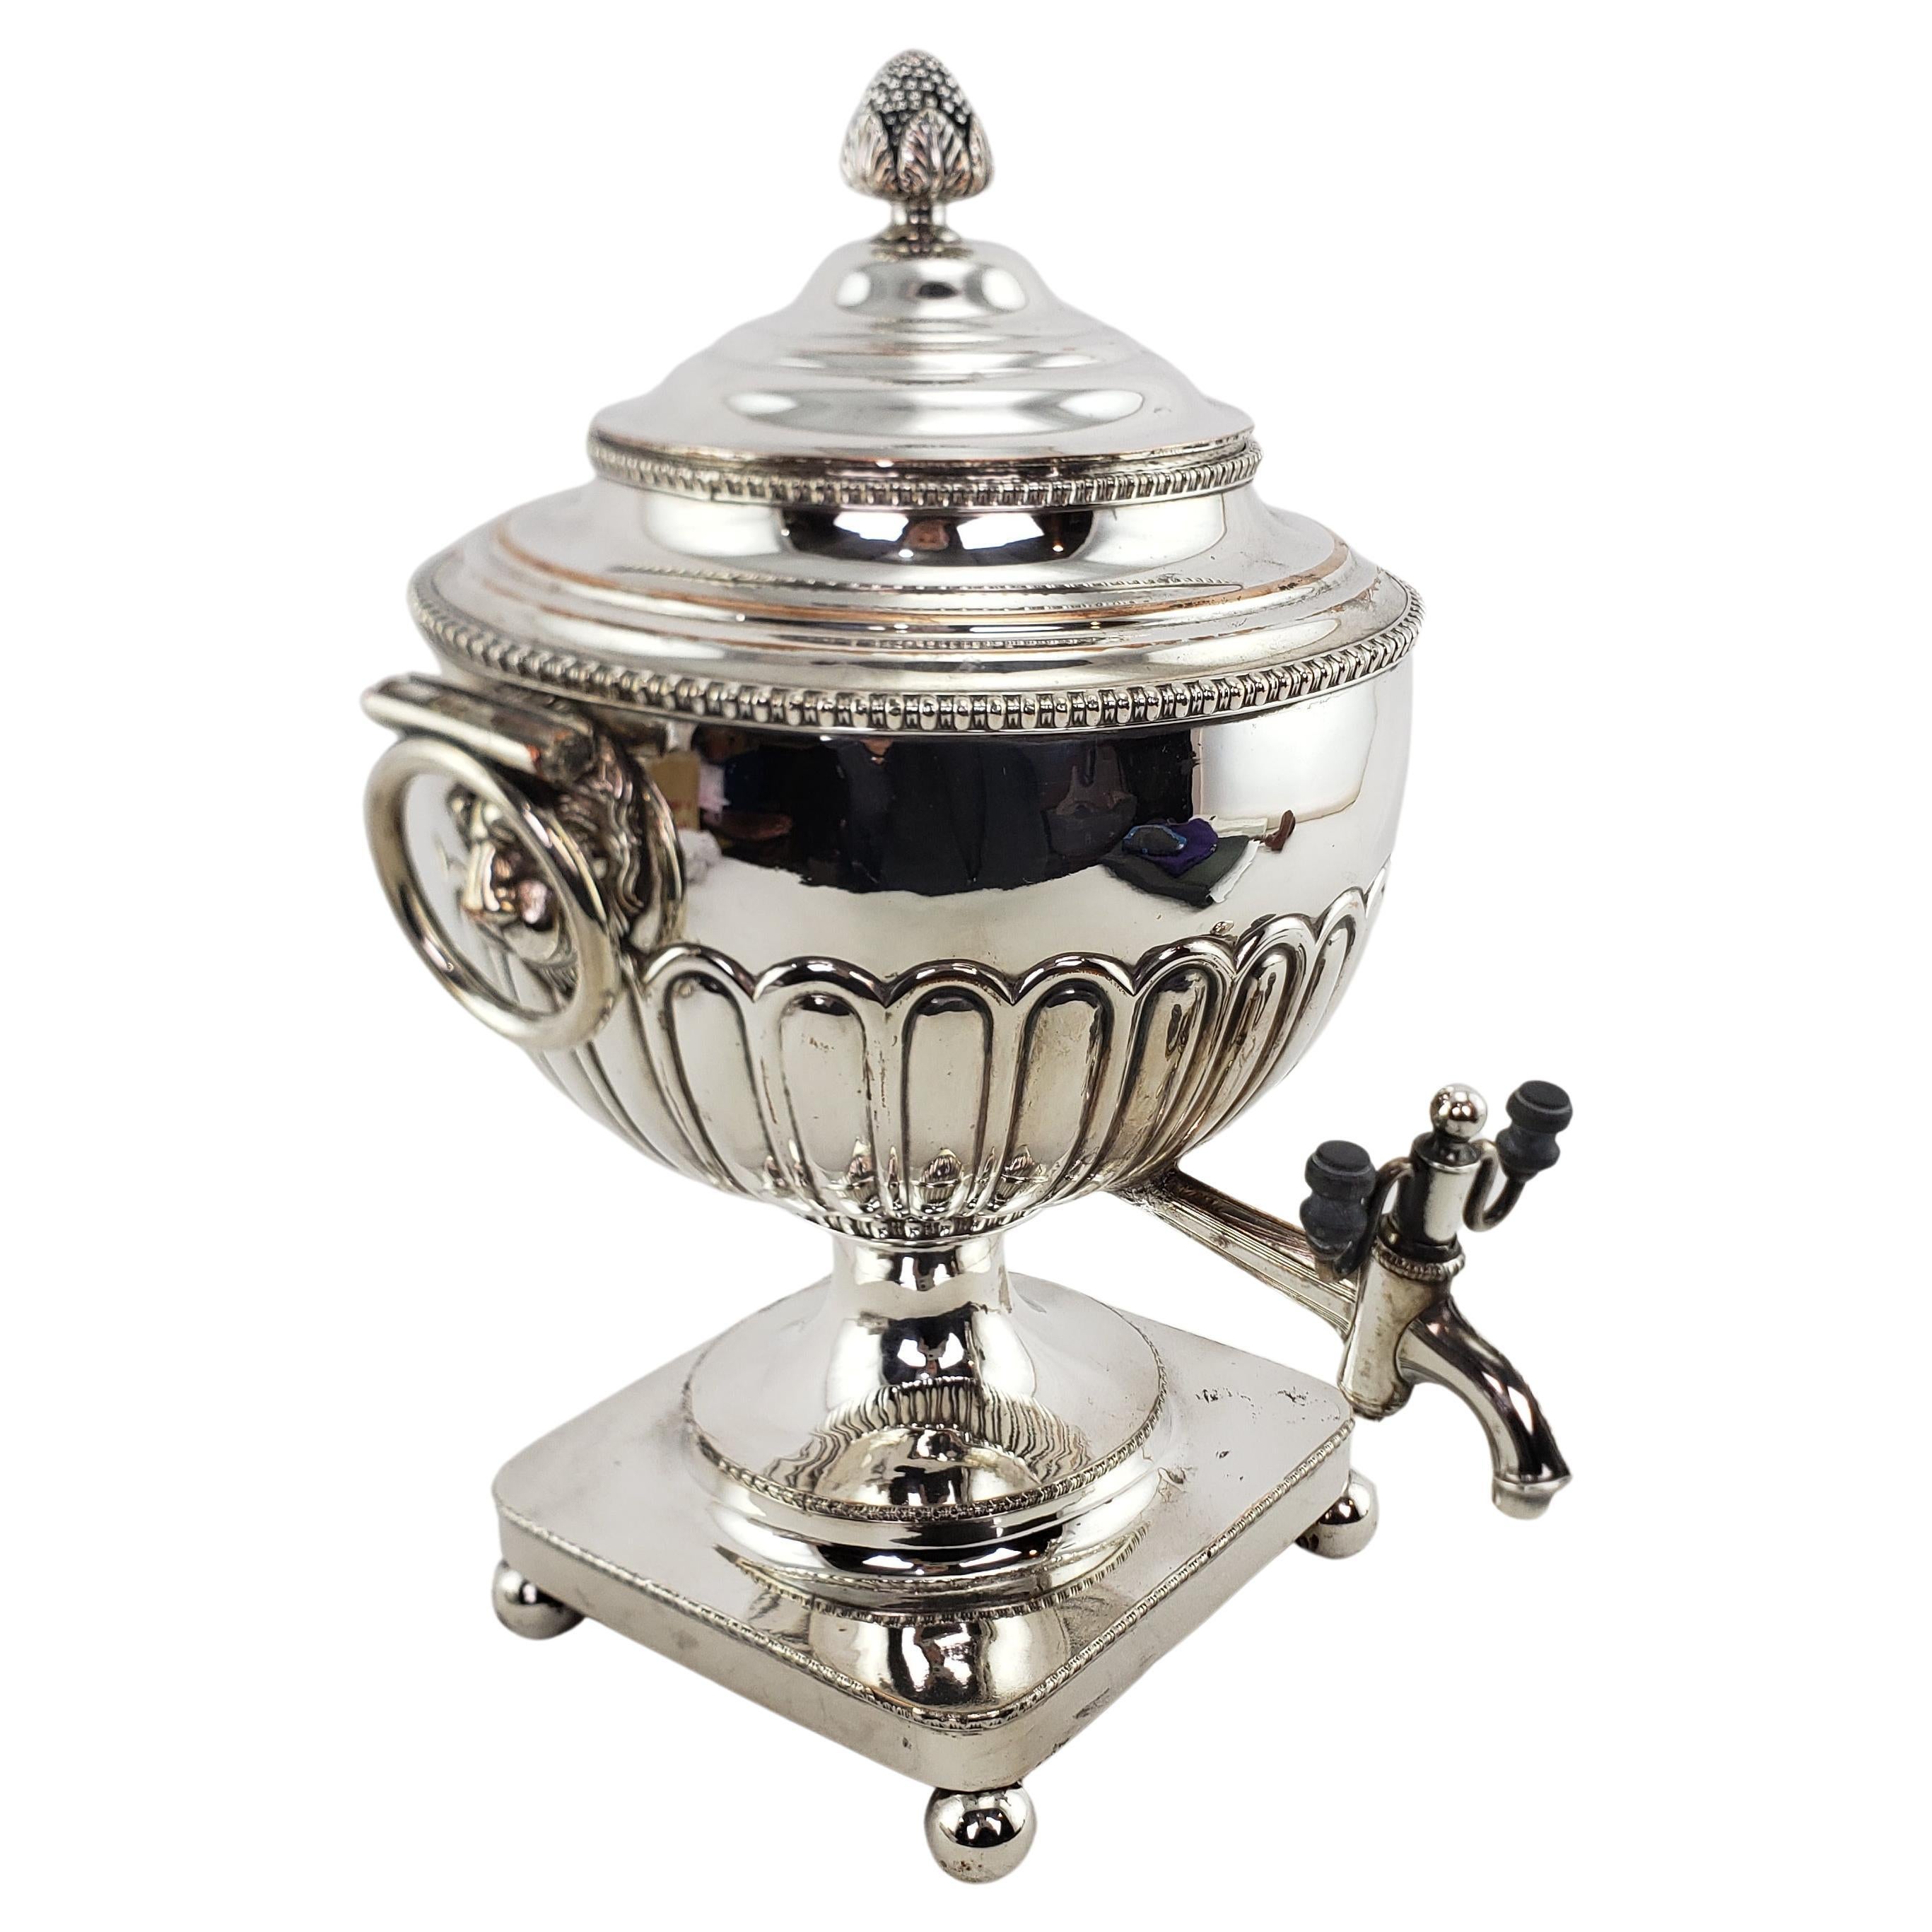 https://a.1stdibscdn.com/antique-georgian-styled-silver-plated-tea-or-hot-water-urn-with-lion-mounts-for-sale/f_13552/f_306163221664400106461/f_30616322_1664400107474_bg_processed.jpg